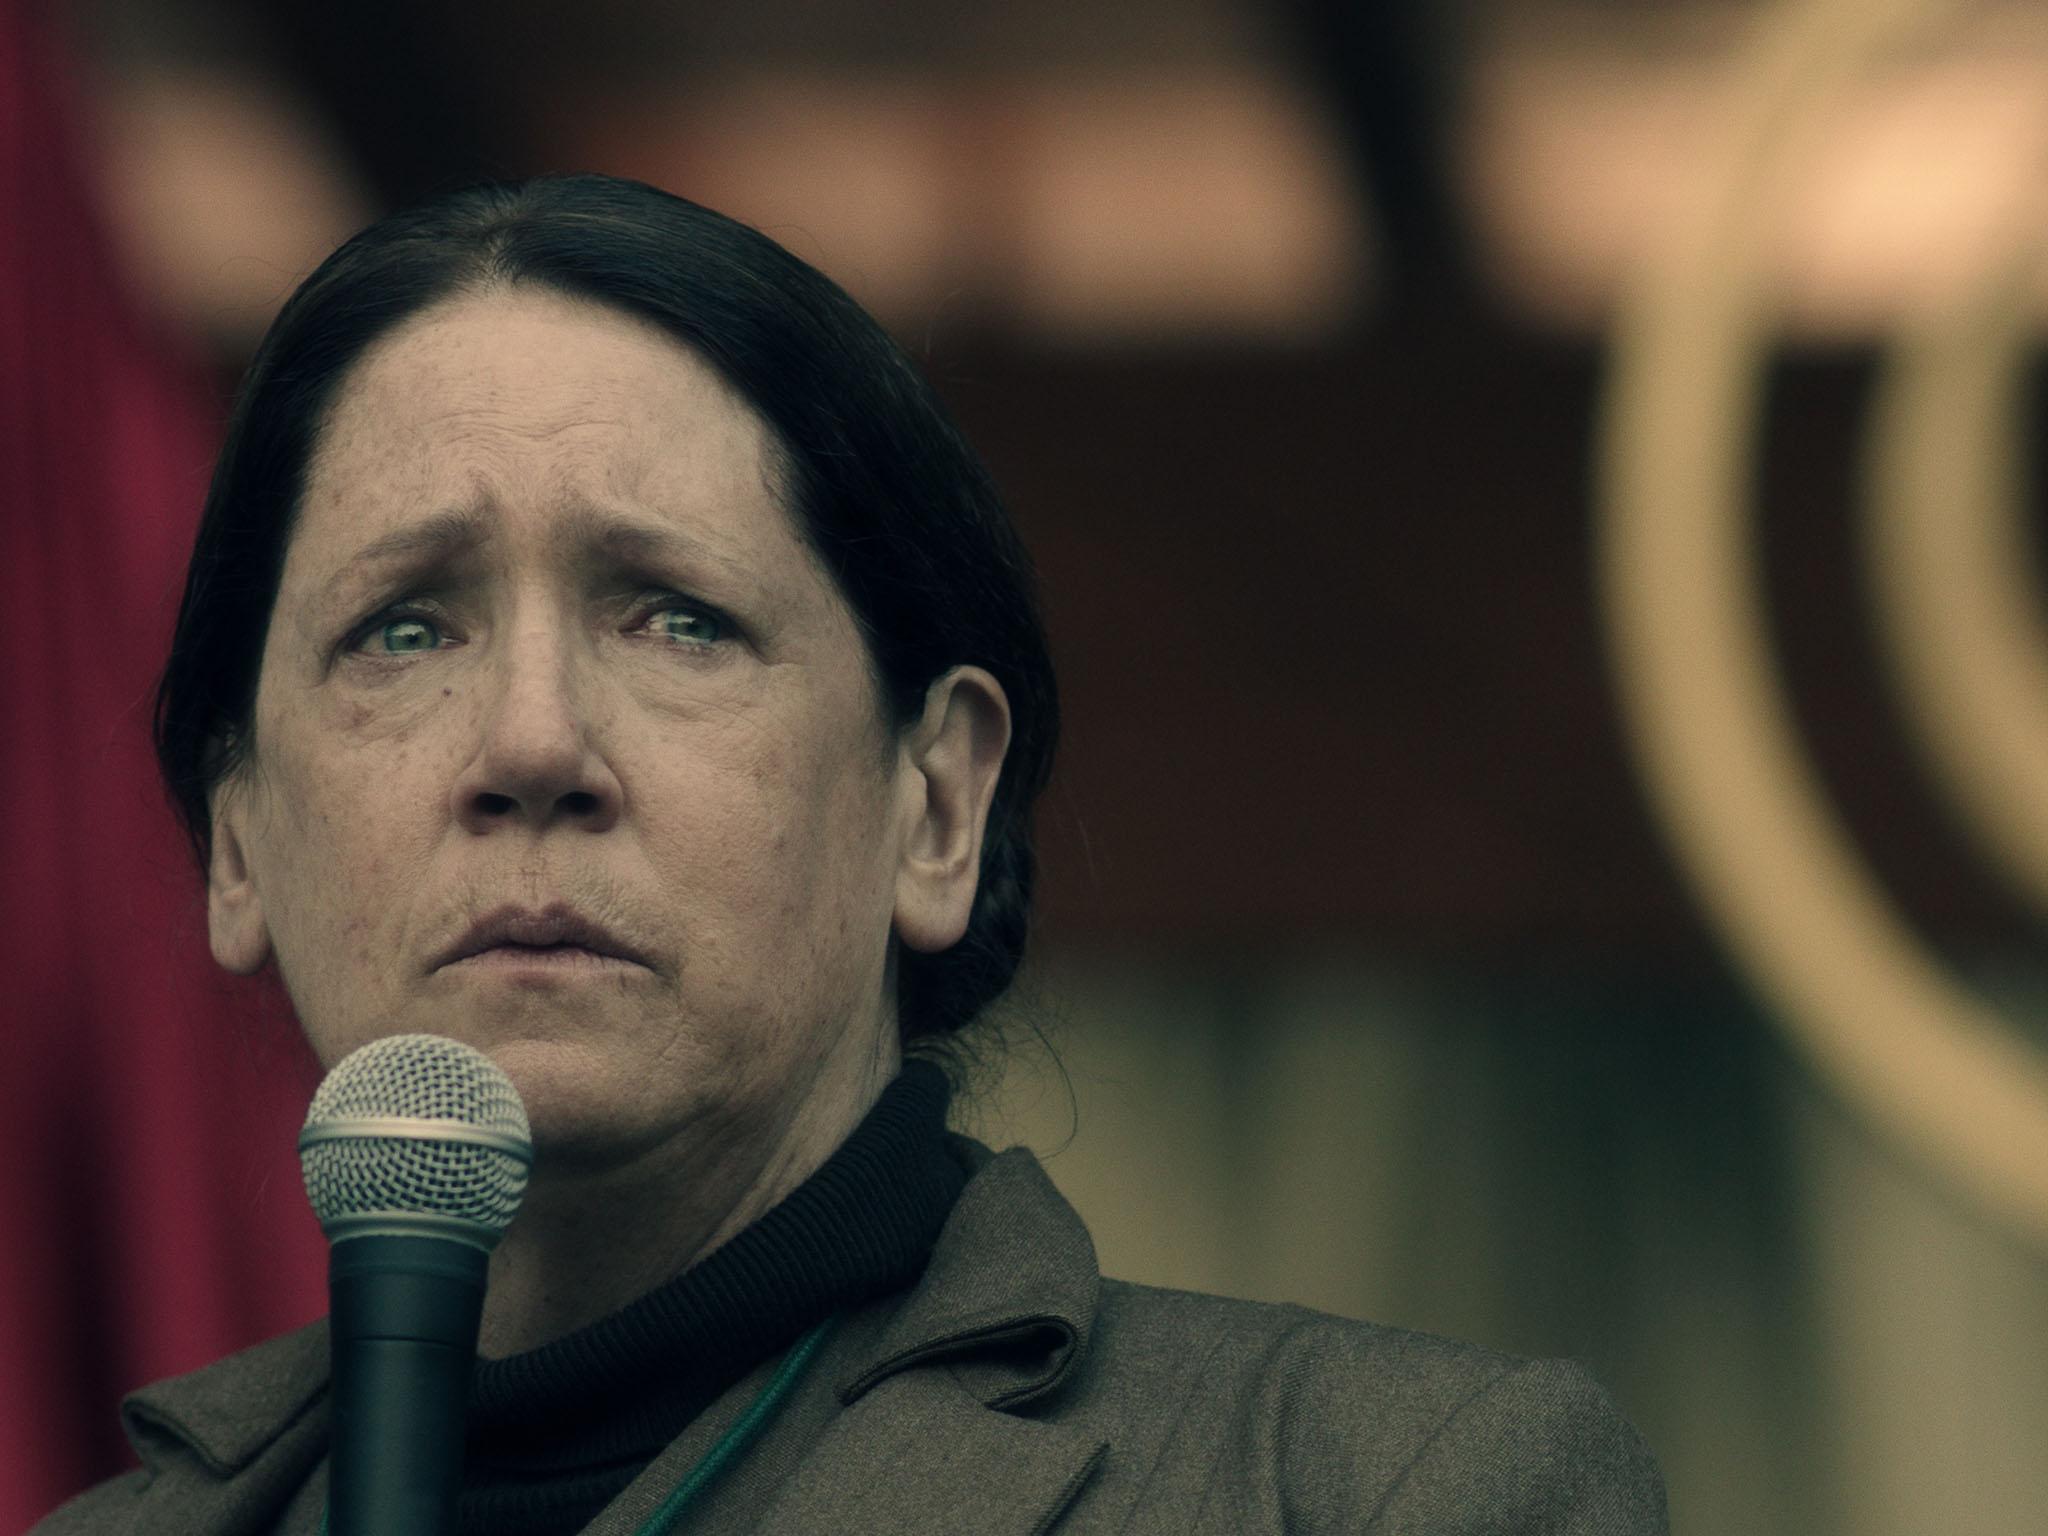 Ann Dowd who played Aunt Lydia in 'The Hanmaid's Tale' condemns the character actor term because they dismiss the greater dream